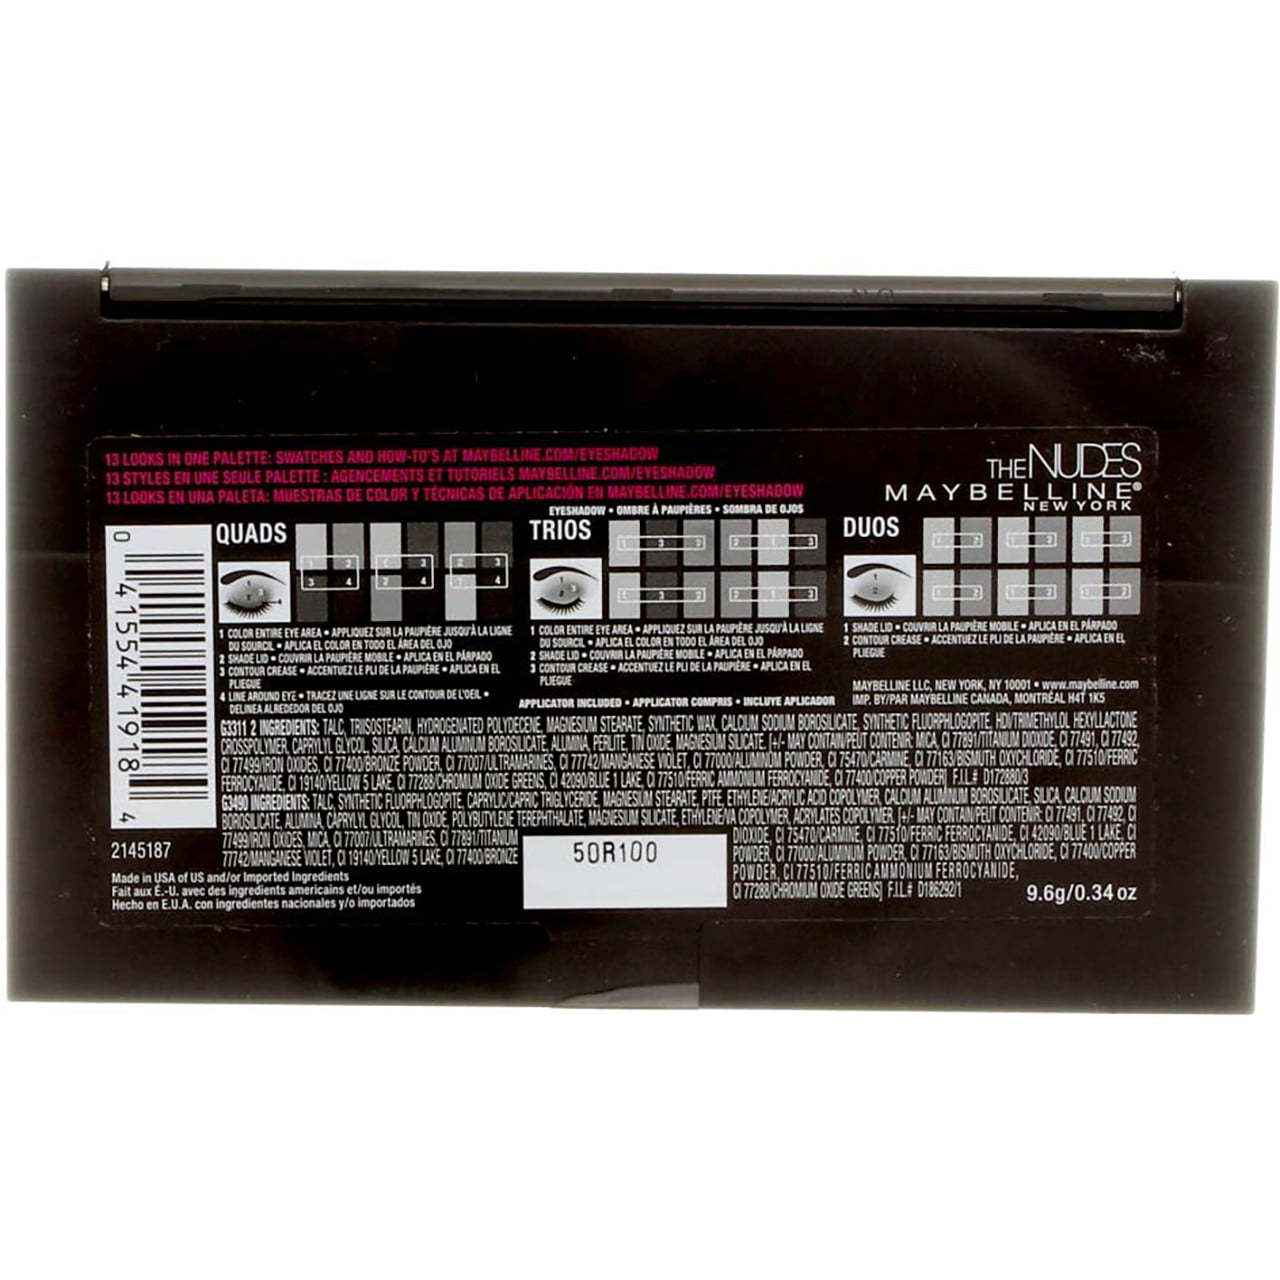 Maybelline Eyeshadow Palette, The Nudes, 12 Shade Palette - image 4 of 7